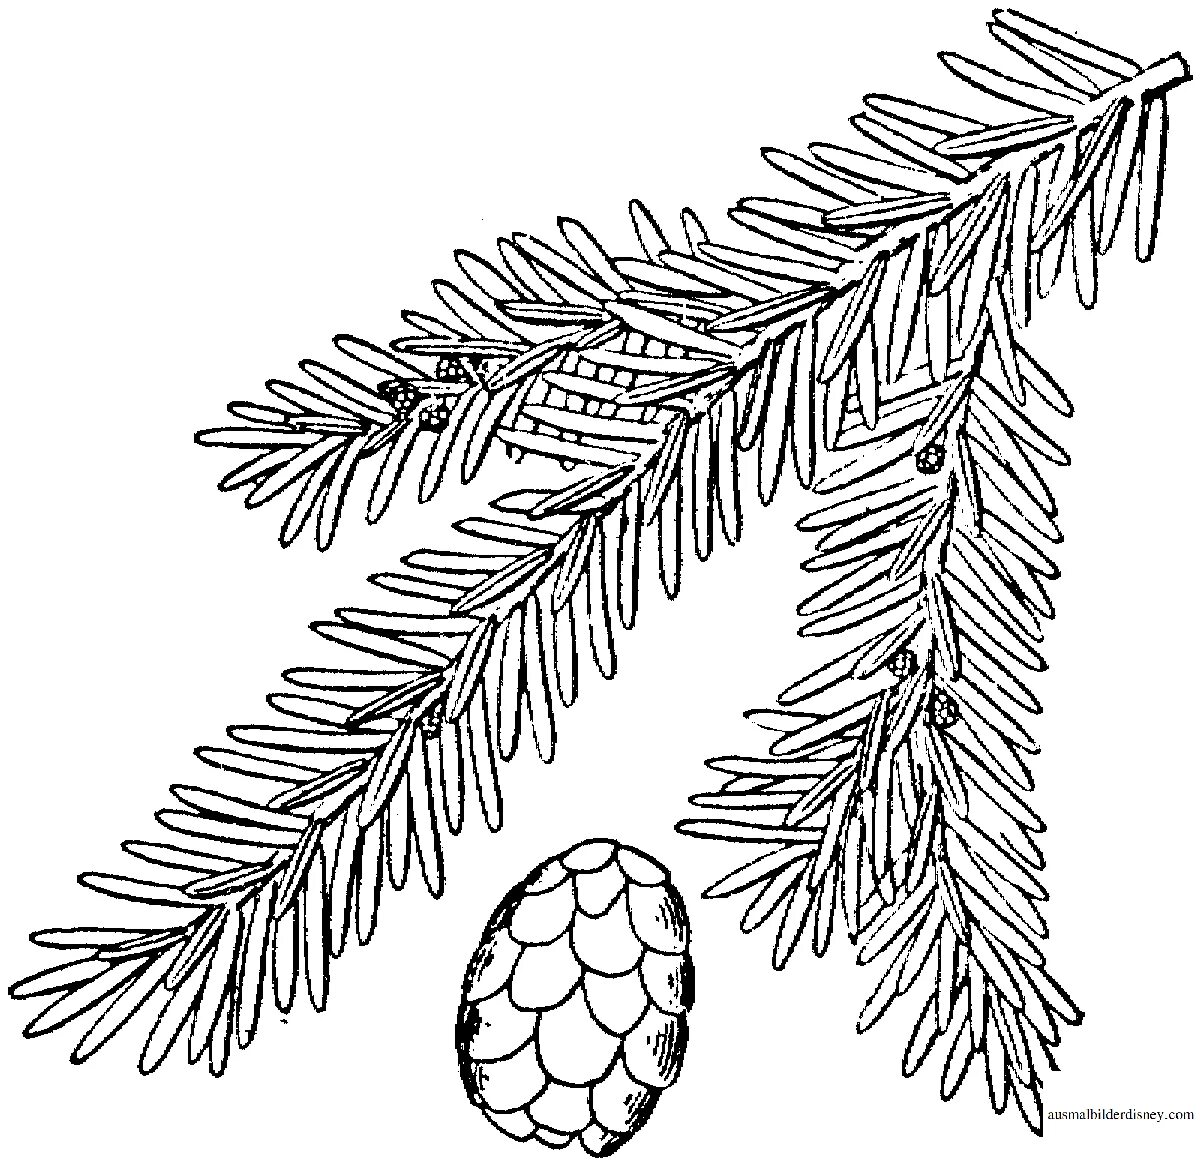 Fancy spruce branch coloring page